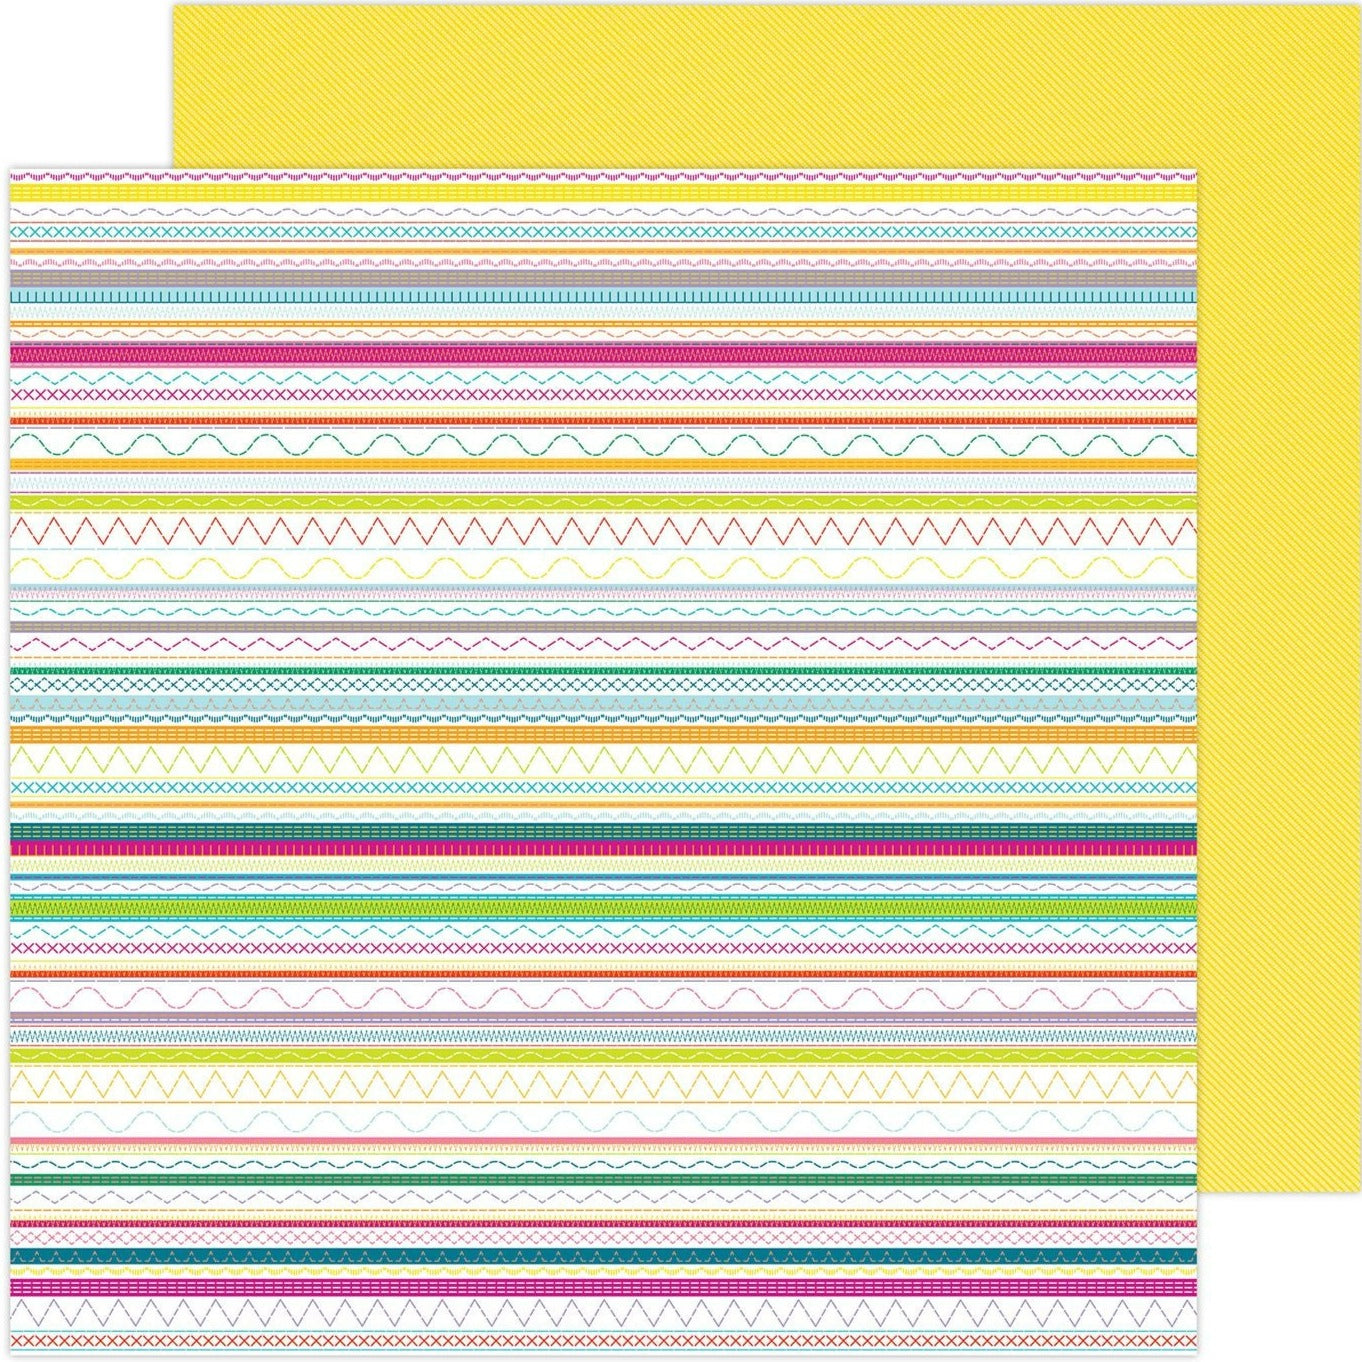 12x12, double-sided patterned paper. (Side A - stitching patterns in a rainbow of colors, Side B - yellow twill pattern background)